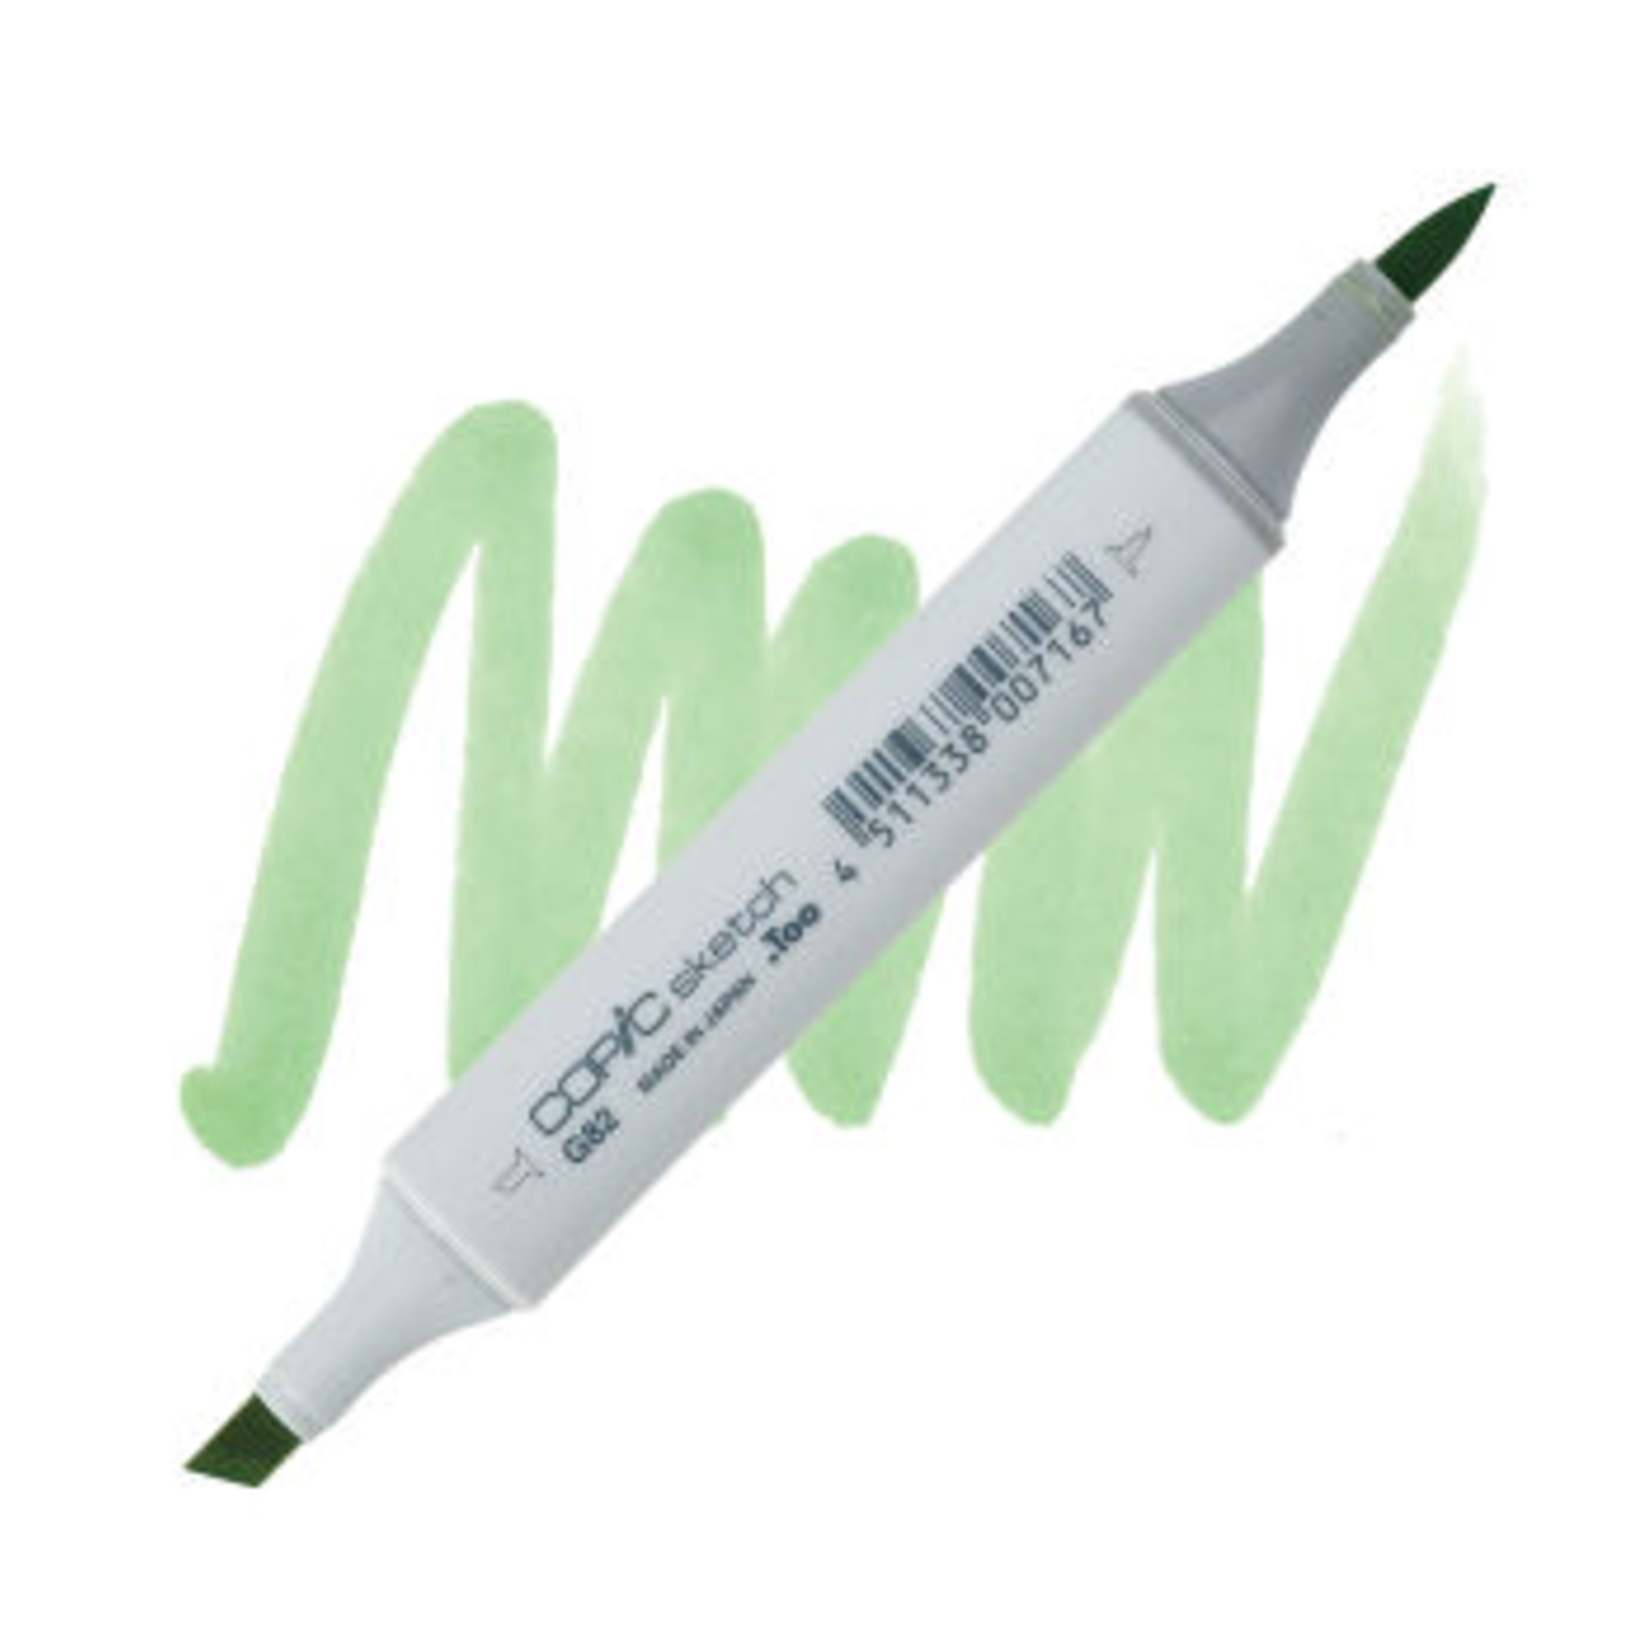 Copic Copic Marker G82 - Spring Dim Green